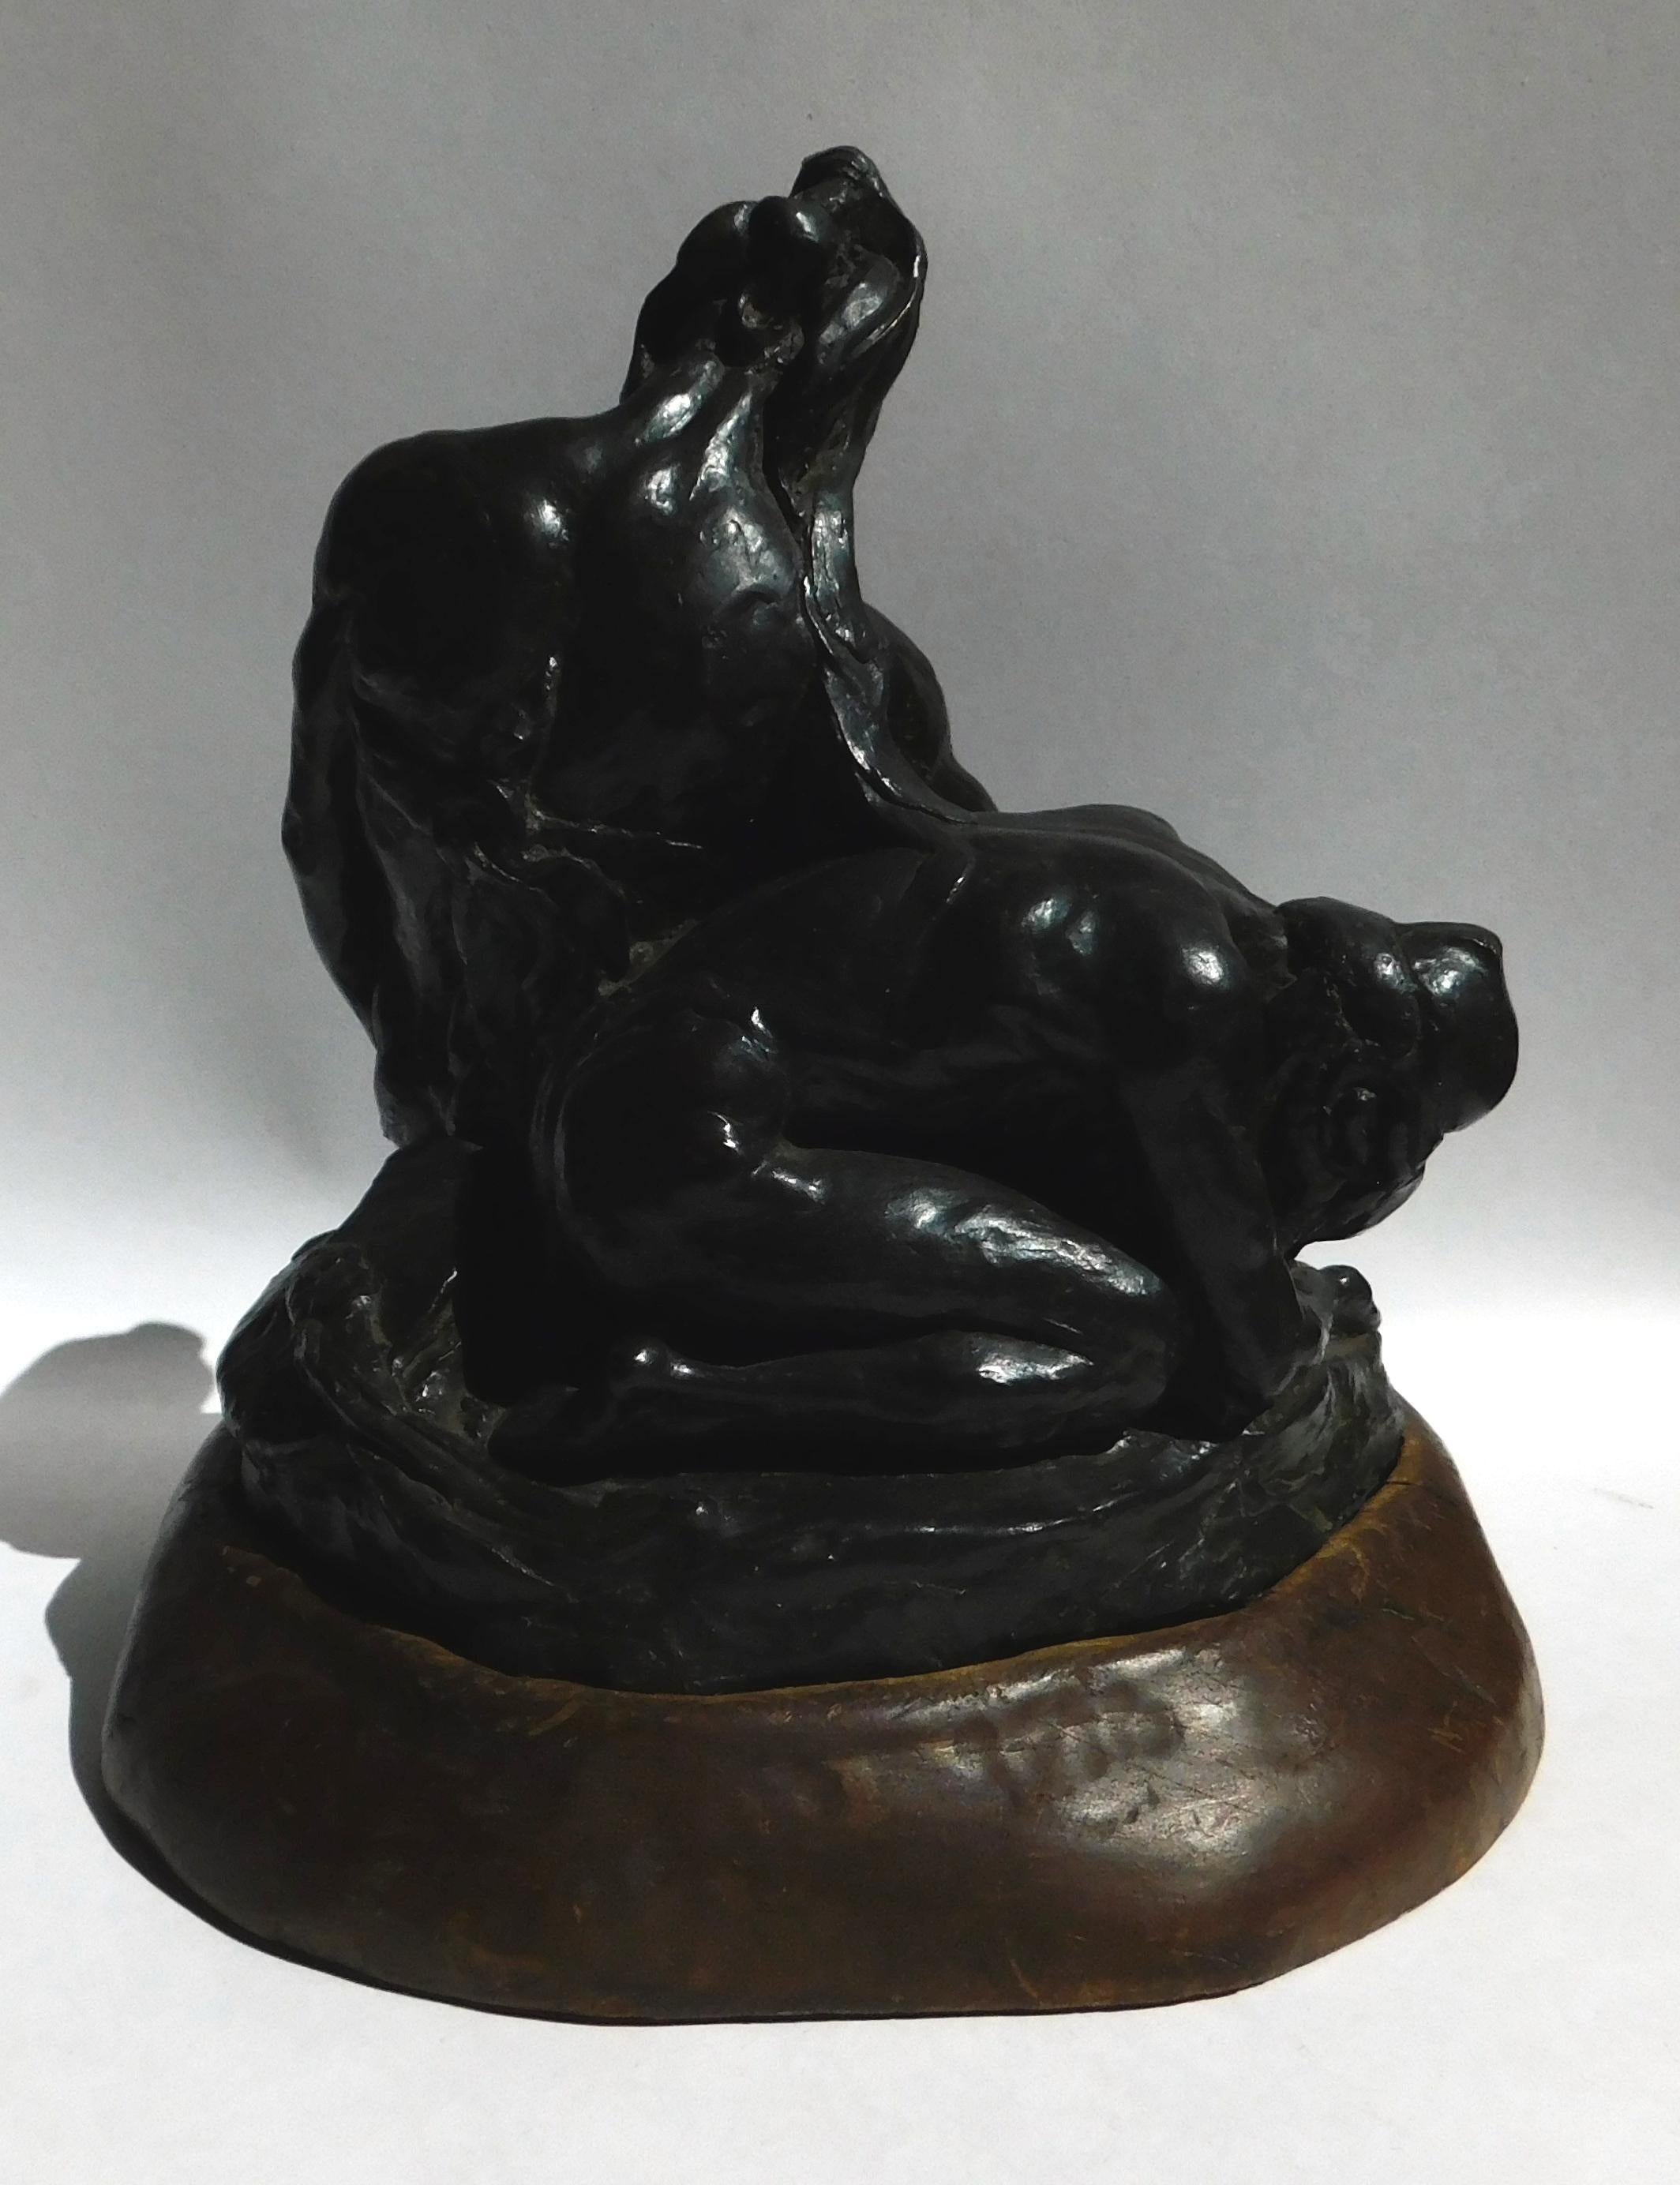 Donal Hord Bronze Sculpture, 1927, “Dying Warriors” For Sale 2